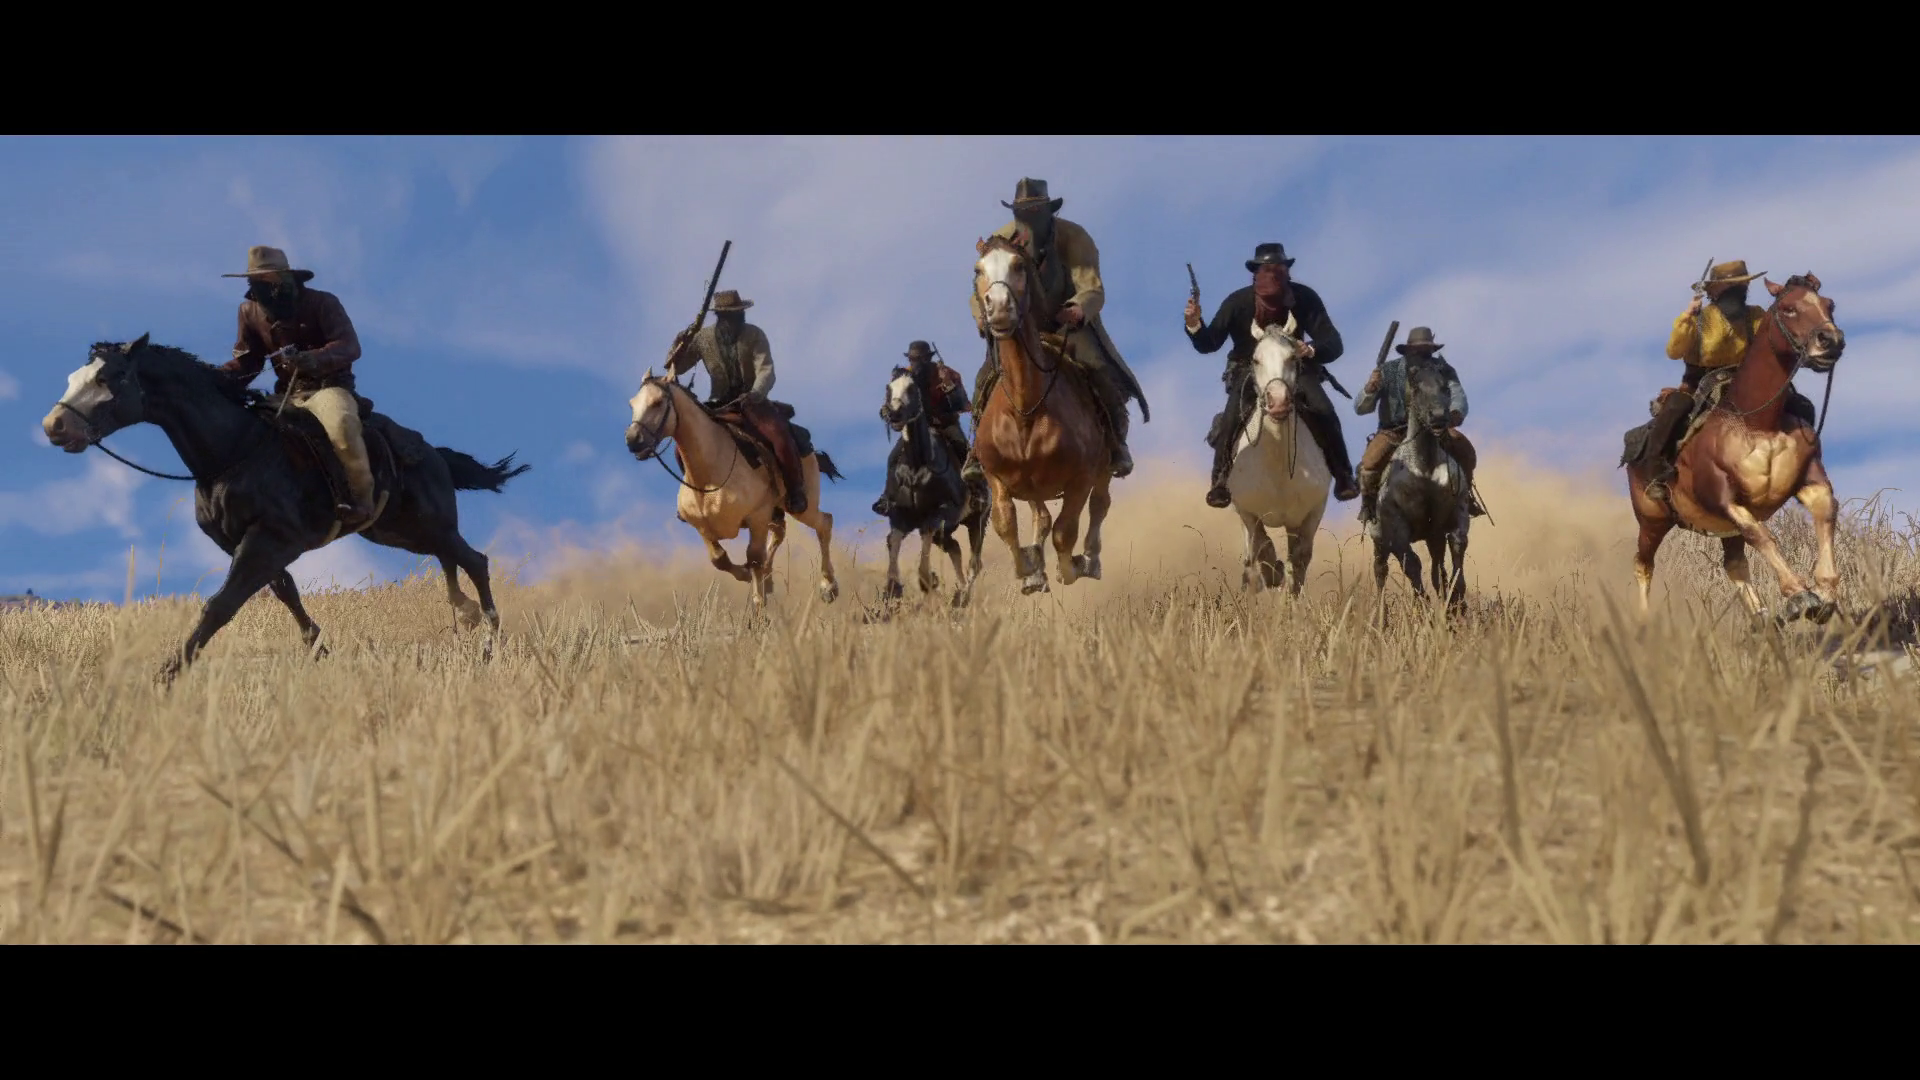 http://www.rdrvision.com/images/content/red-dead-redemption-2/trailer_1/red-dead-redemption-2_trailer-1_25.png